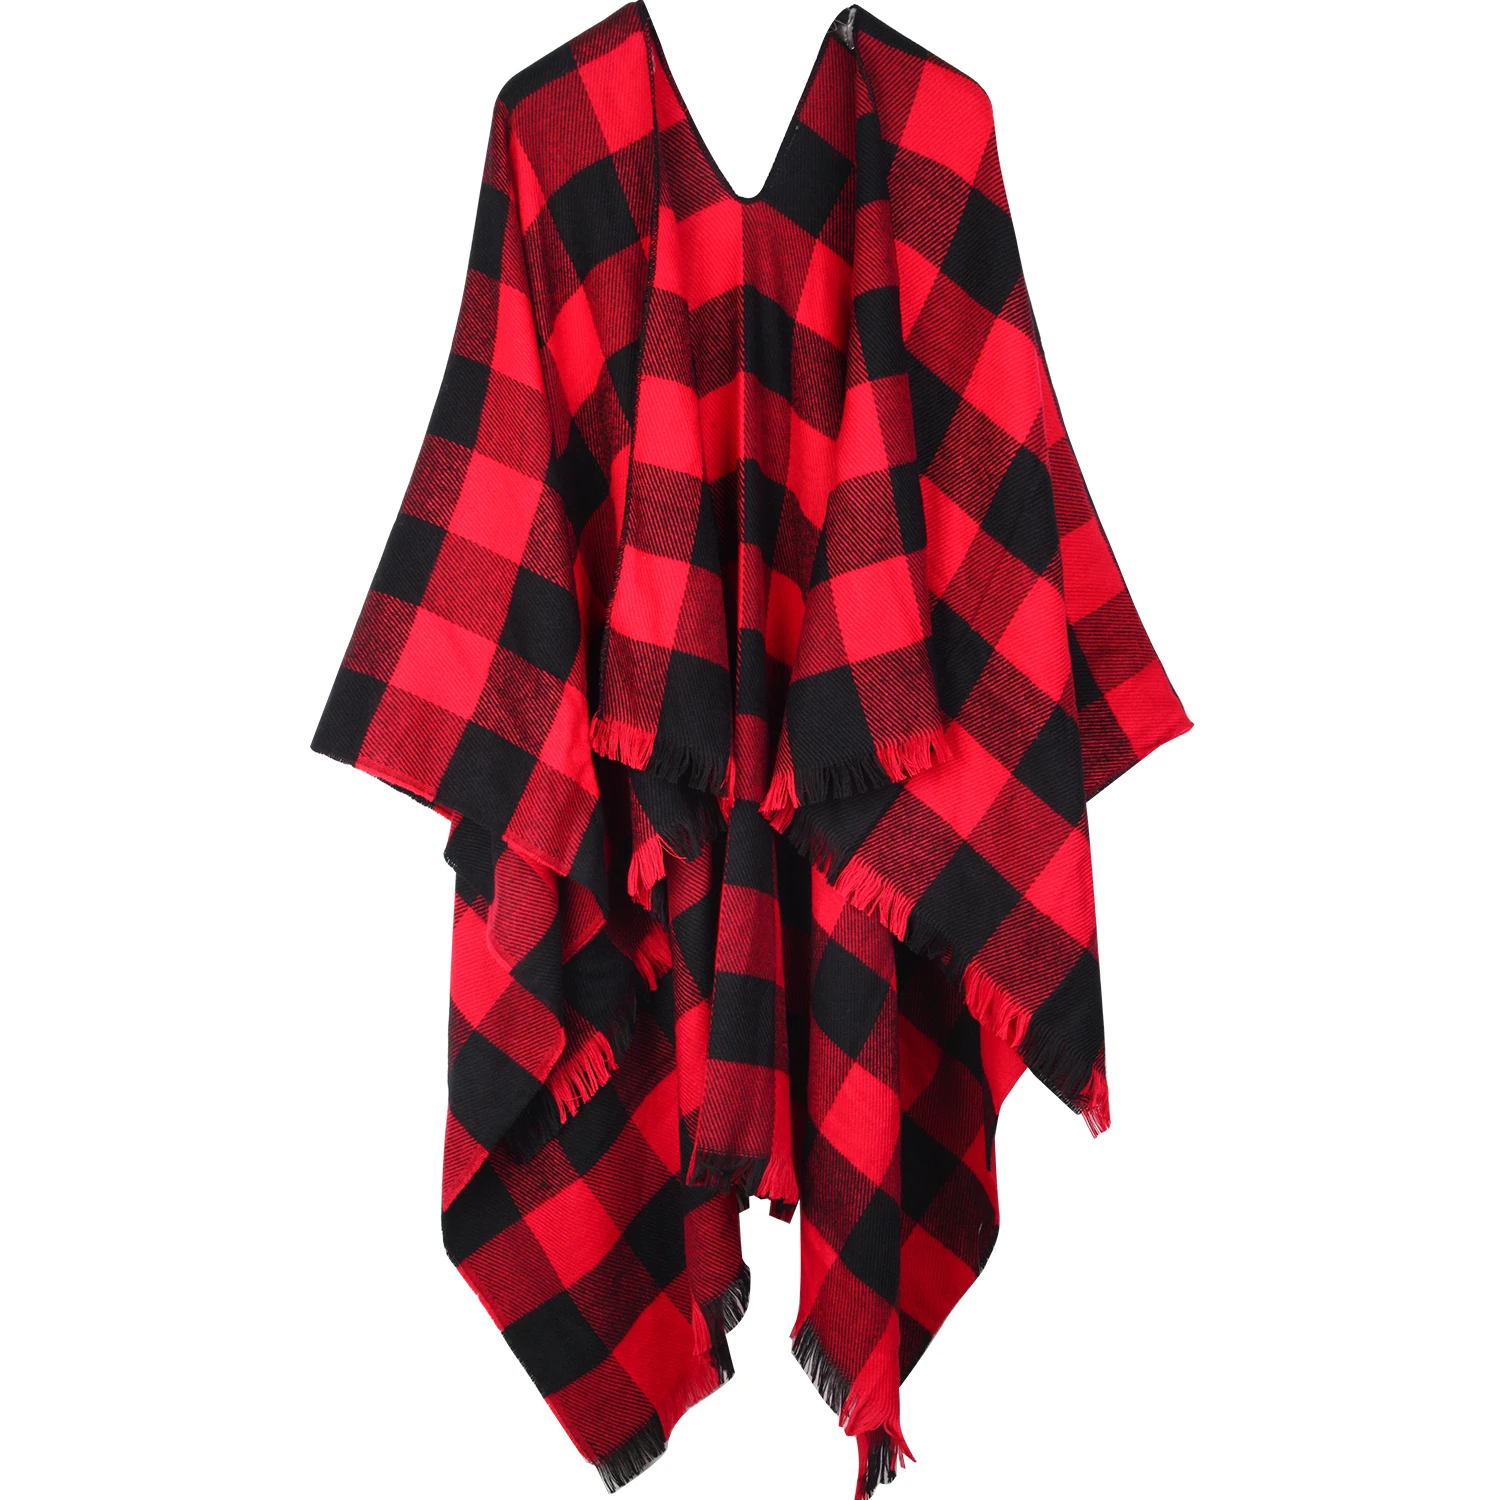 Spring Poncho for Women Warm Scarf Thicken Pashmina Shawls and Wraps Tassel Wearable Poncho Capes Red and black check